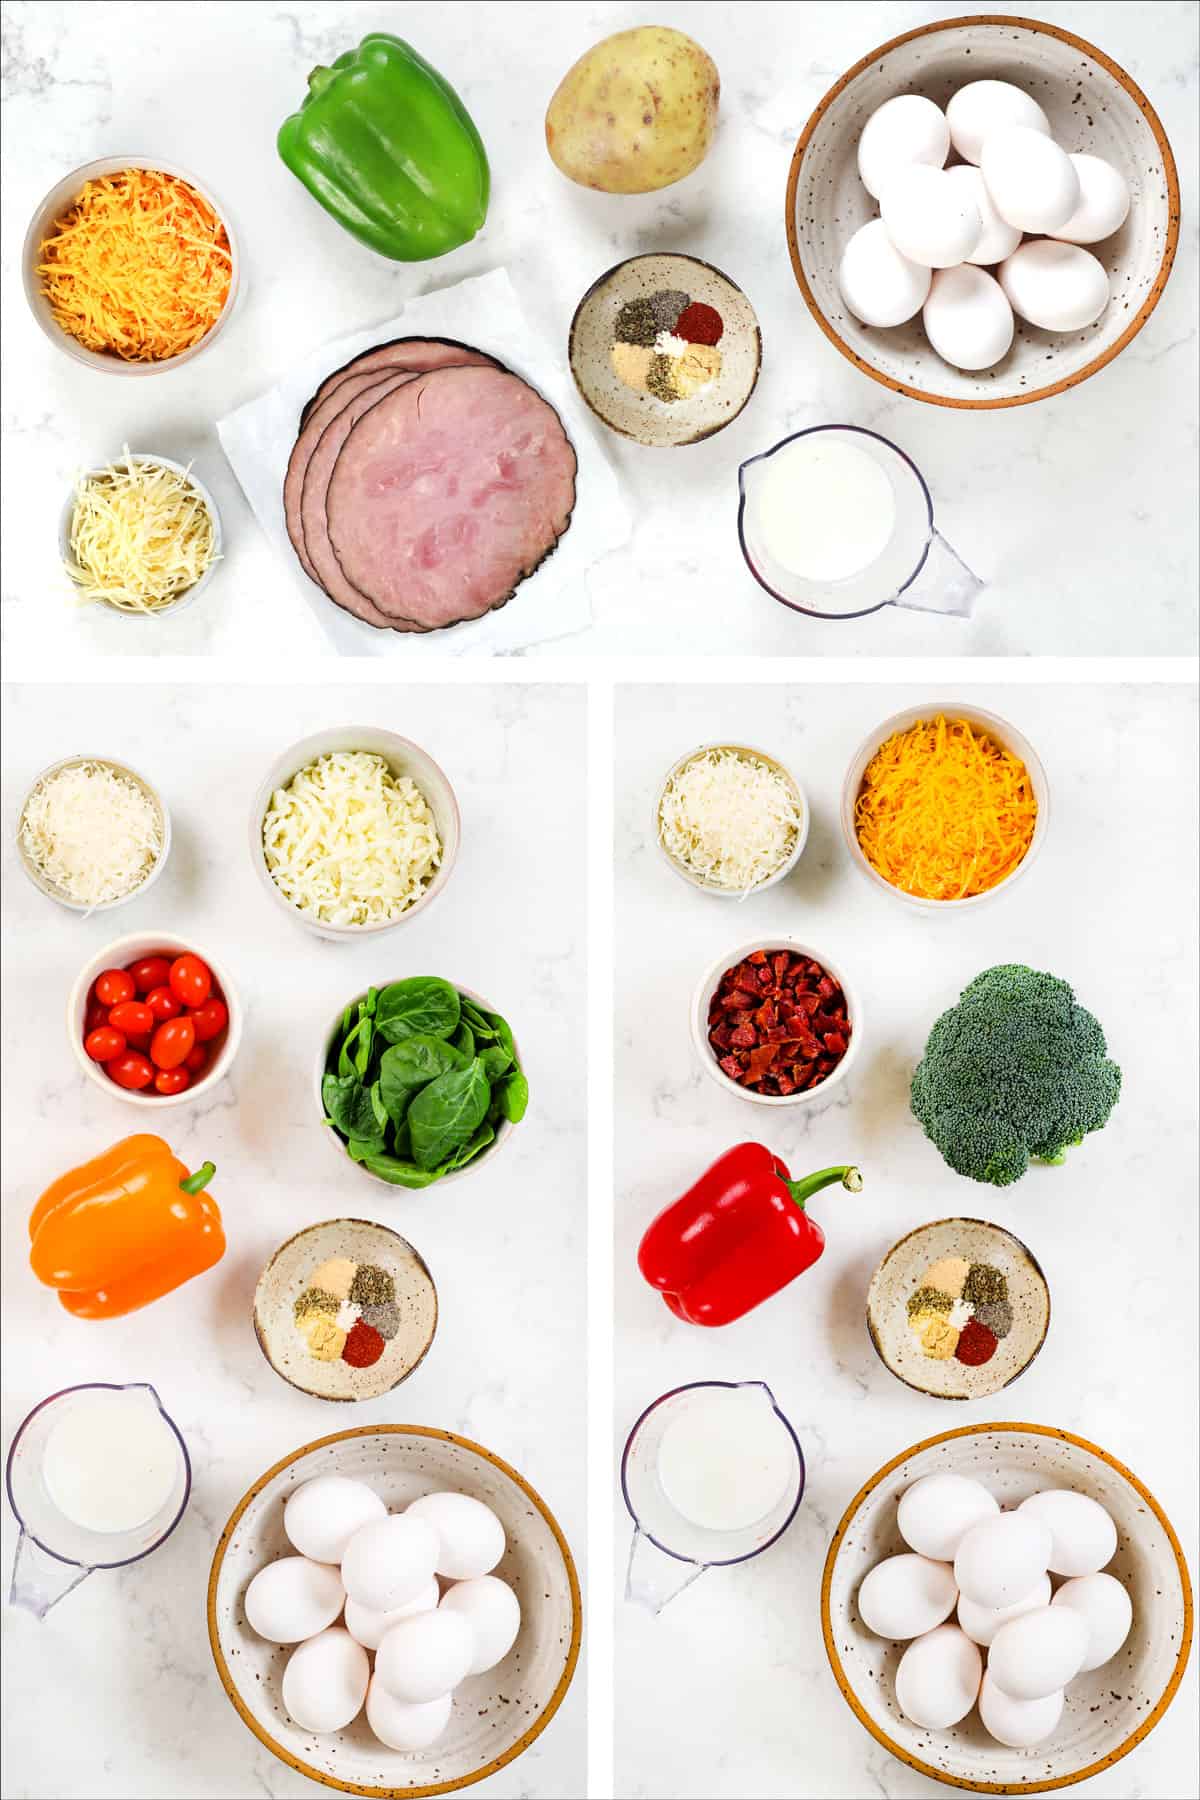 top view of ingredients for egg cups: eggs, ham or bacon, bell peppers, broccoli, potatoes and cheeses